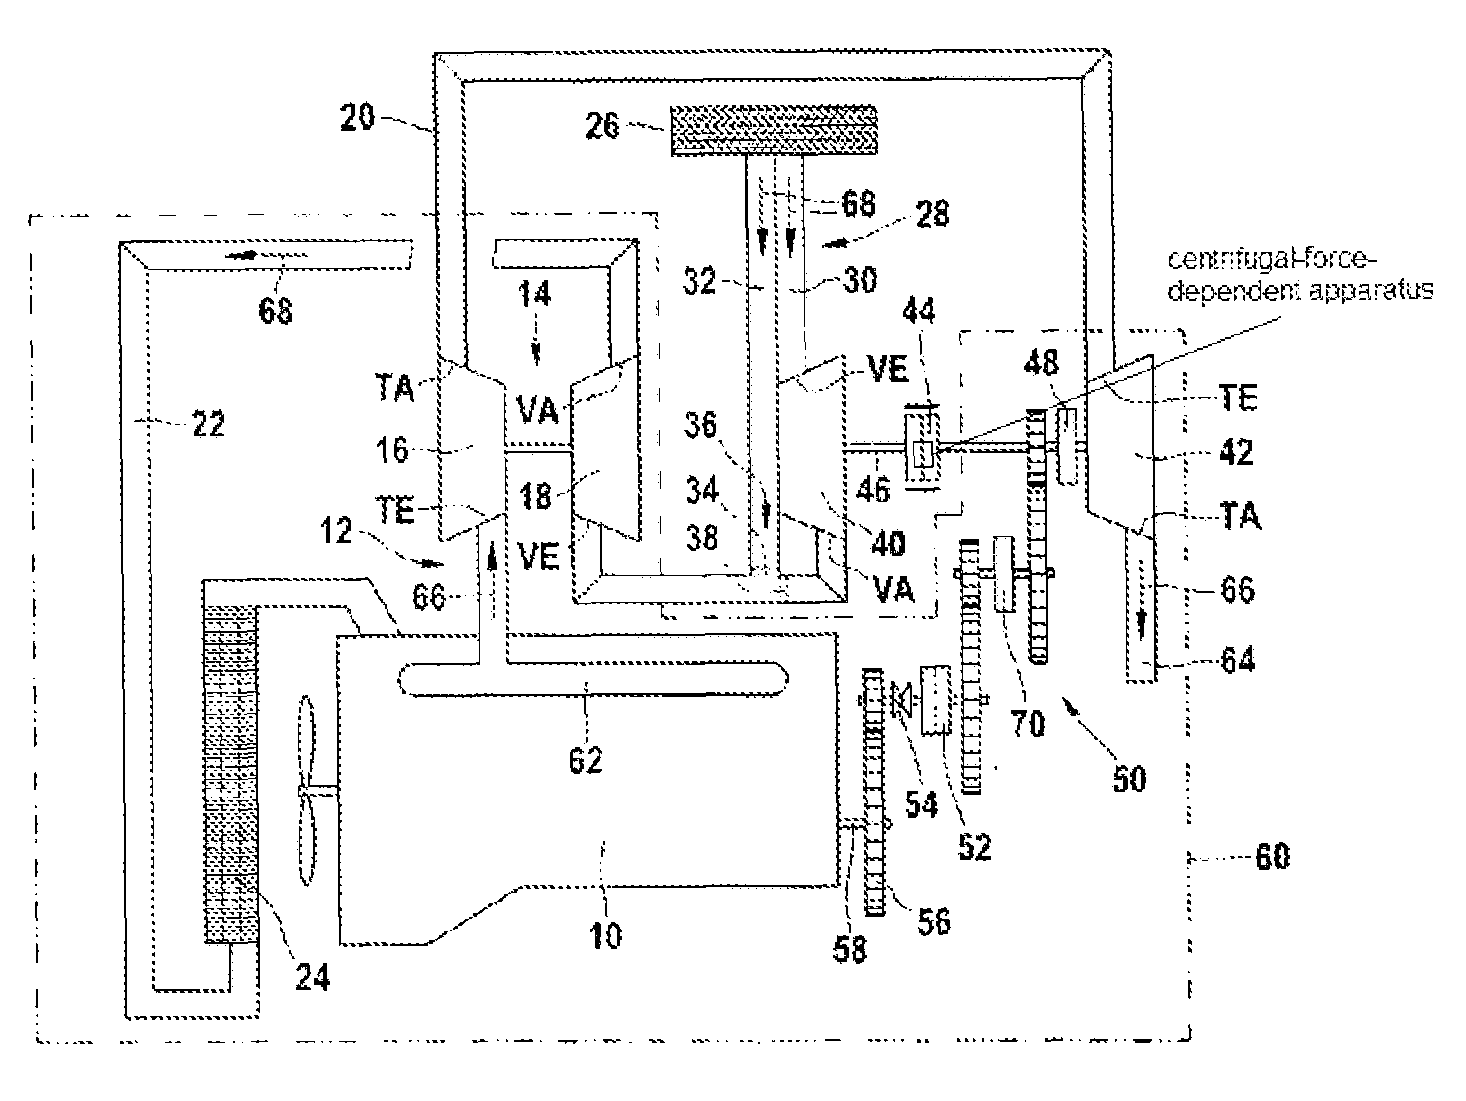 Compound turbocharger system having a connectable compressor